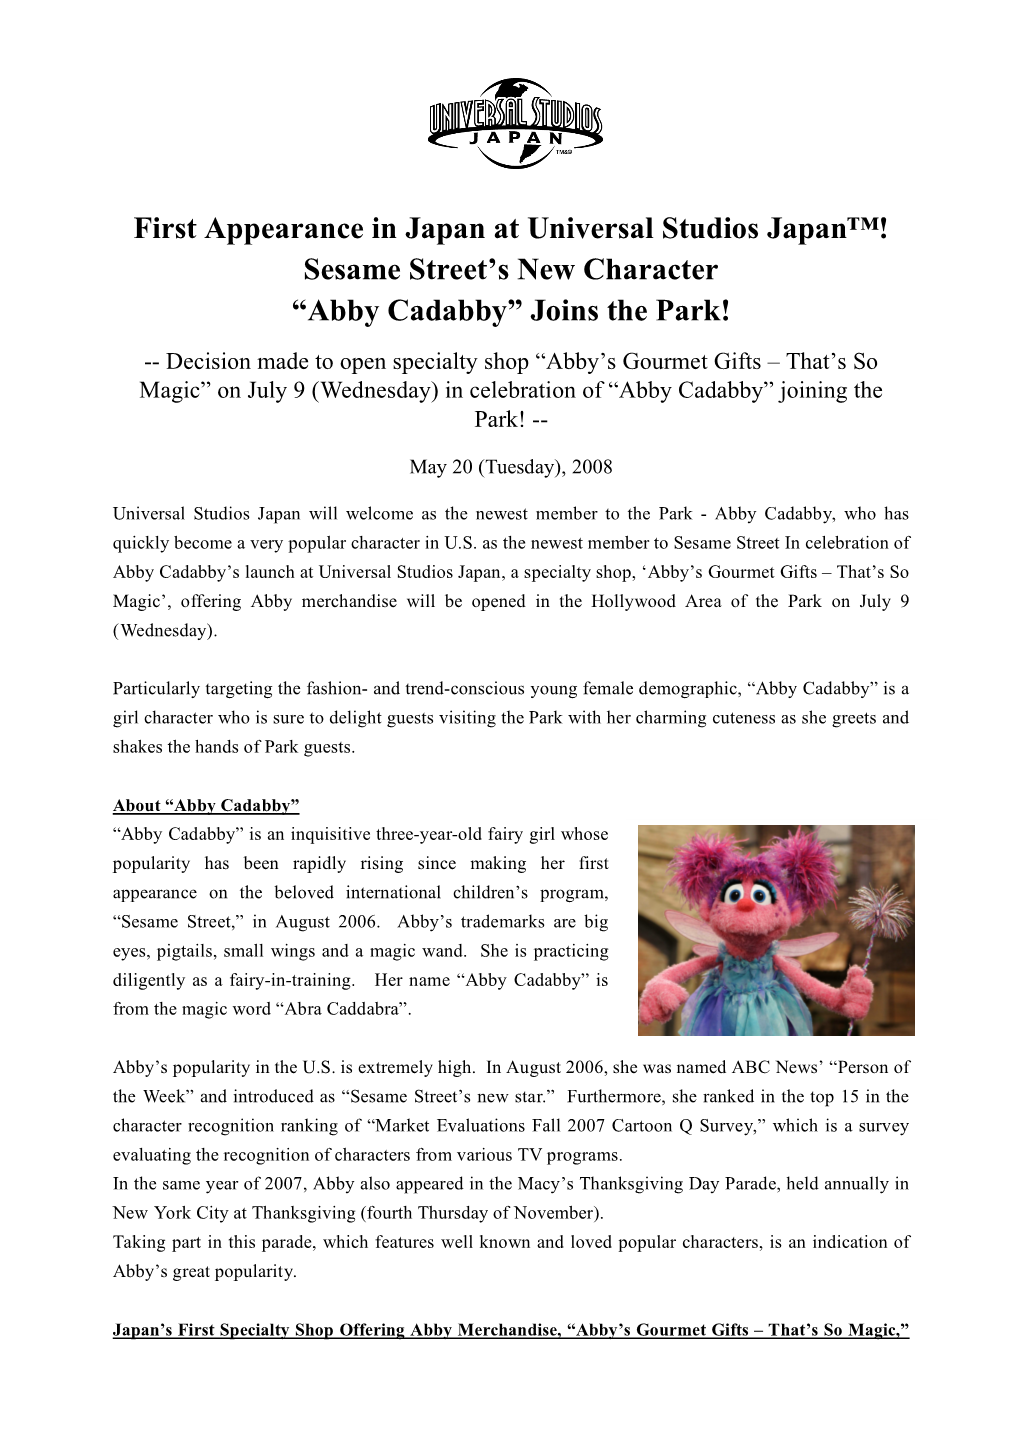 First Appearance in Japan at Universal Studios Japan™! Sesame Street’S New Character “Abby Cadabby” Joins the Park!